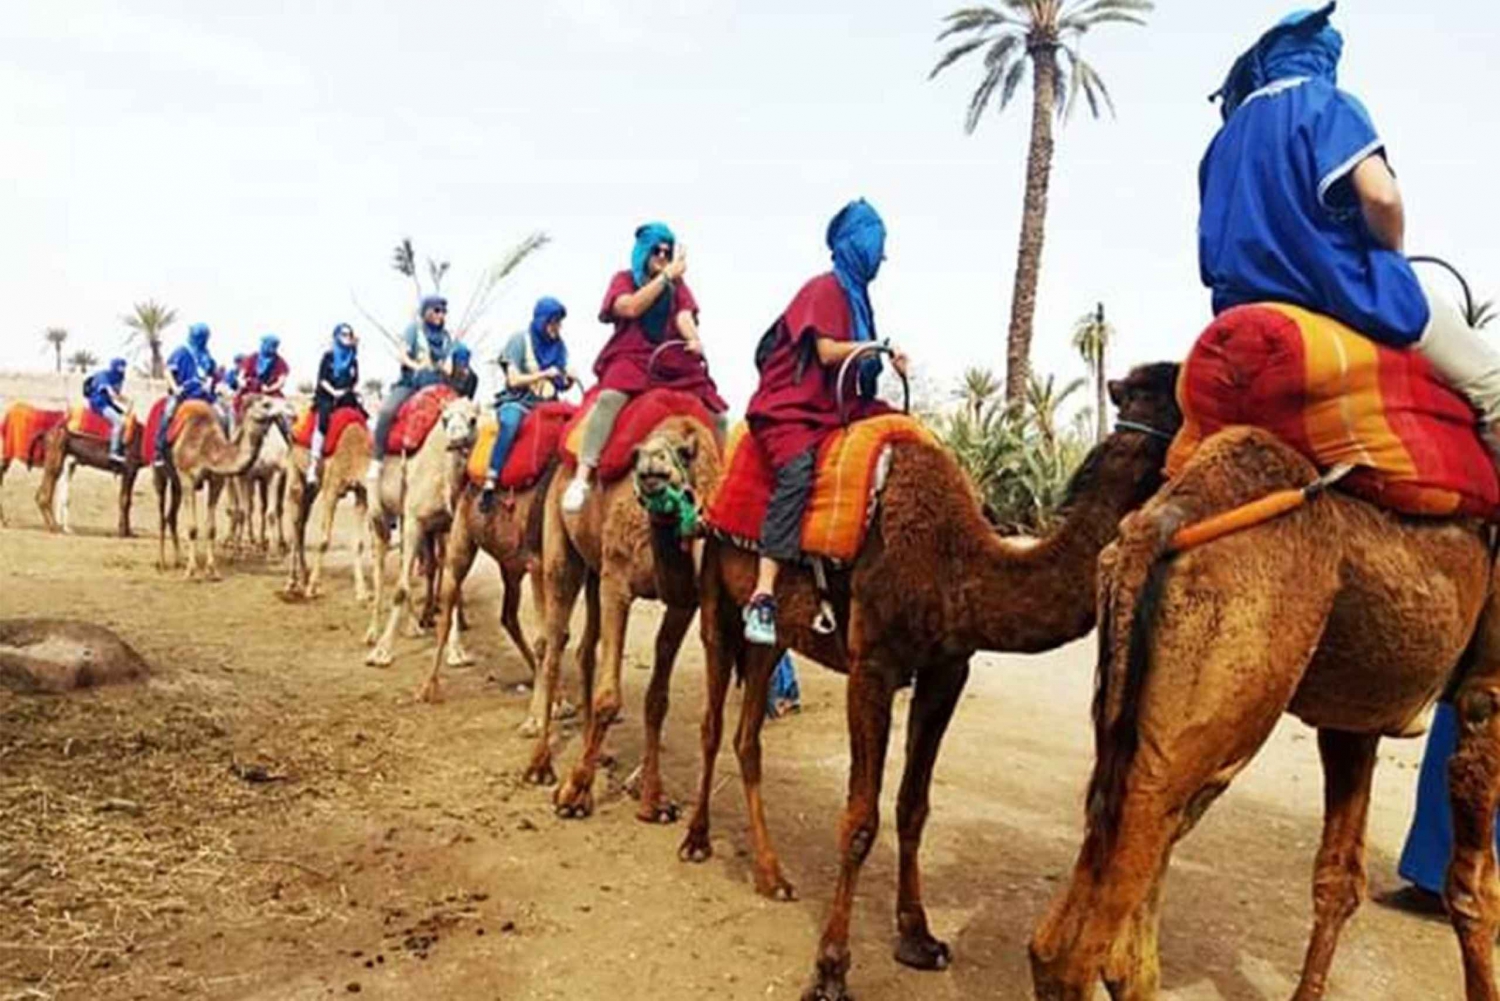 Marrakech: Half-Day Tour with Buggy Ride, Camel Ride and Spa